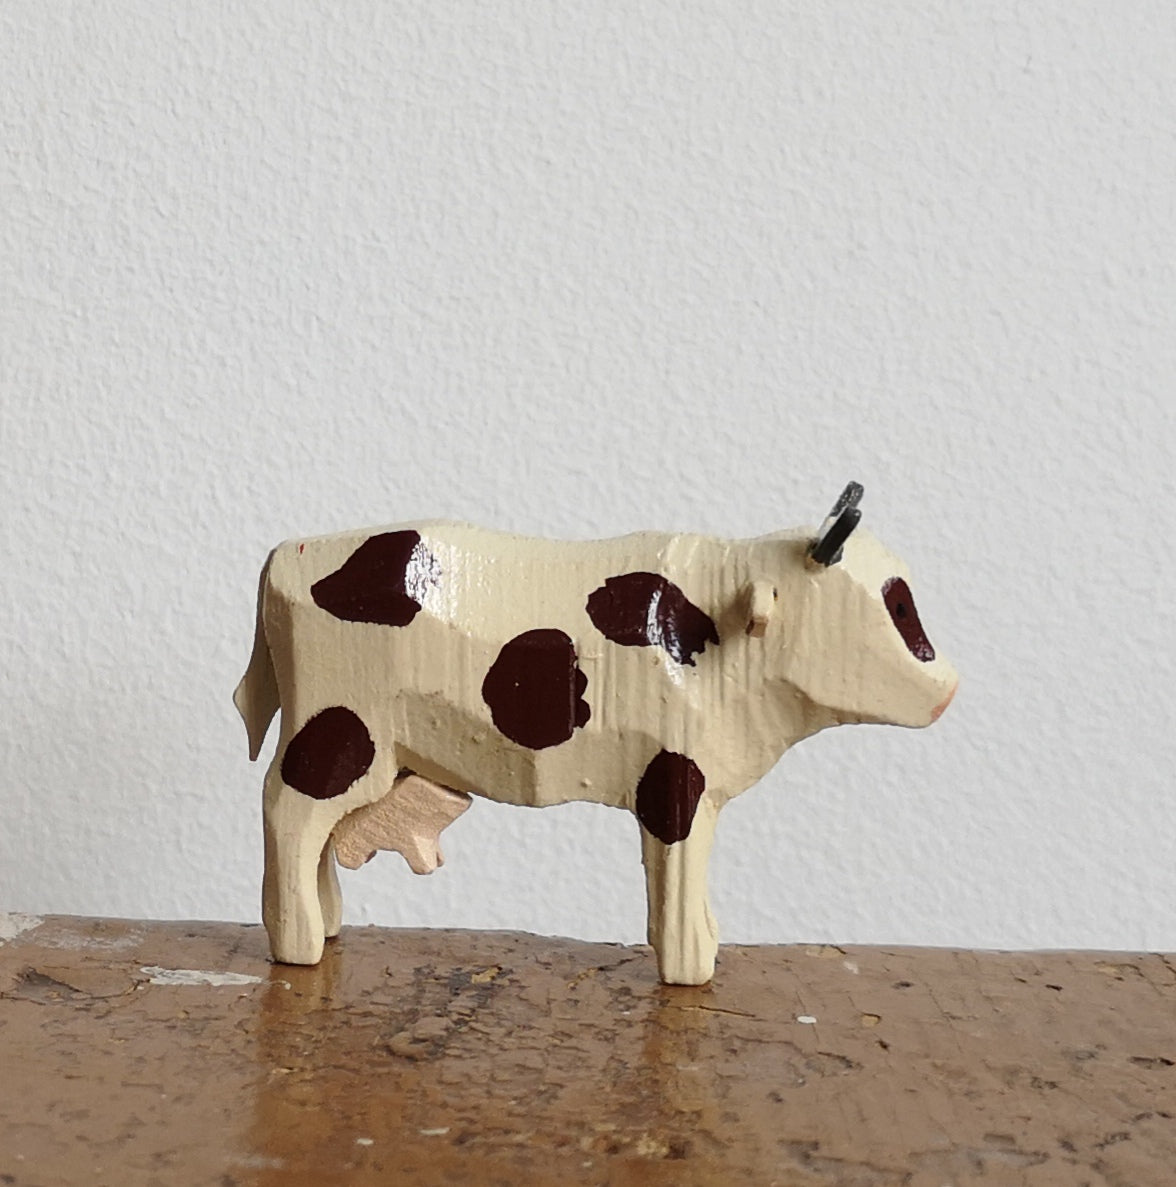 Mini wooden farm and forest animals